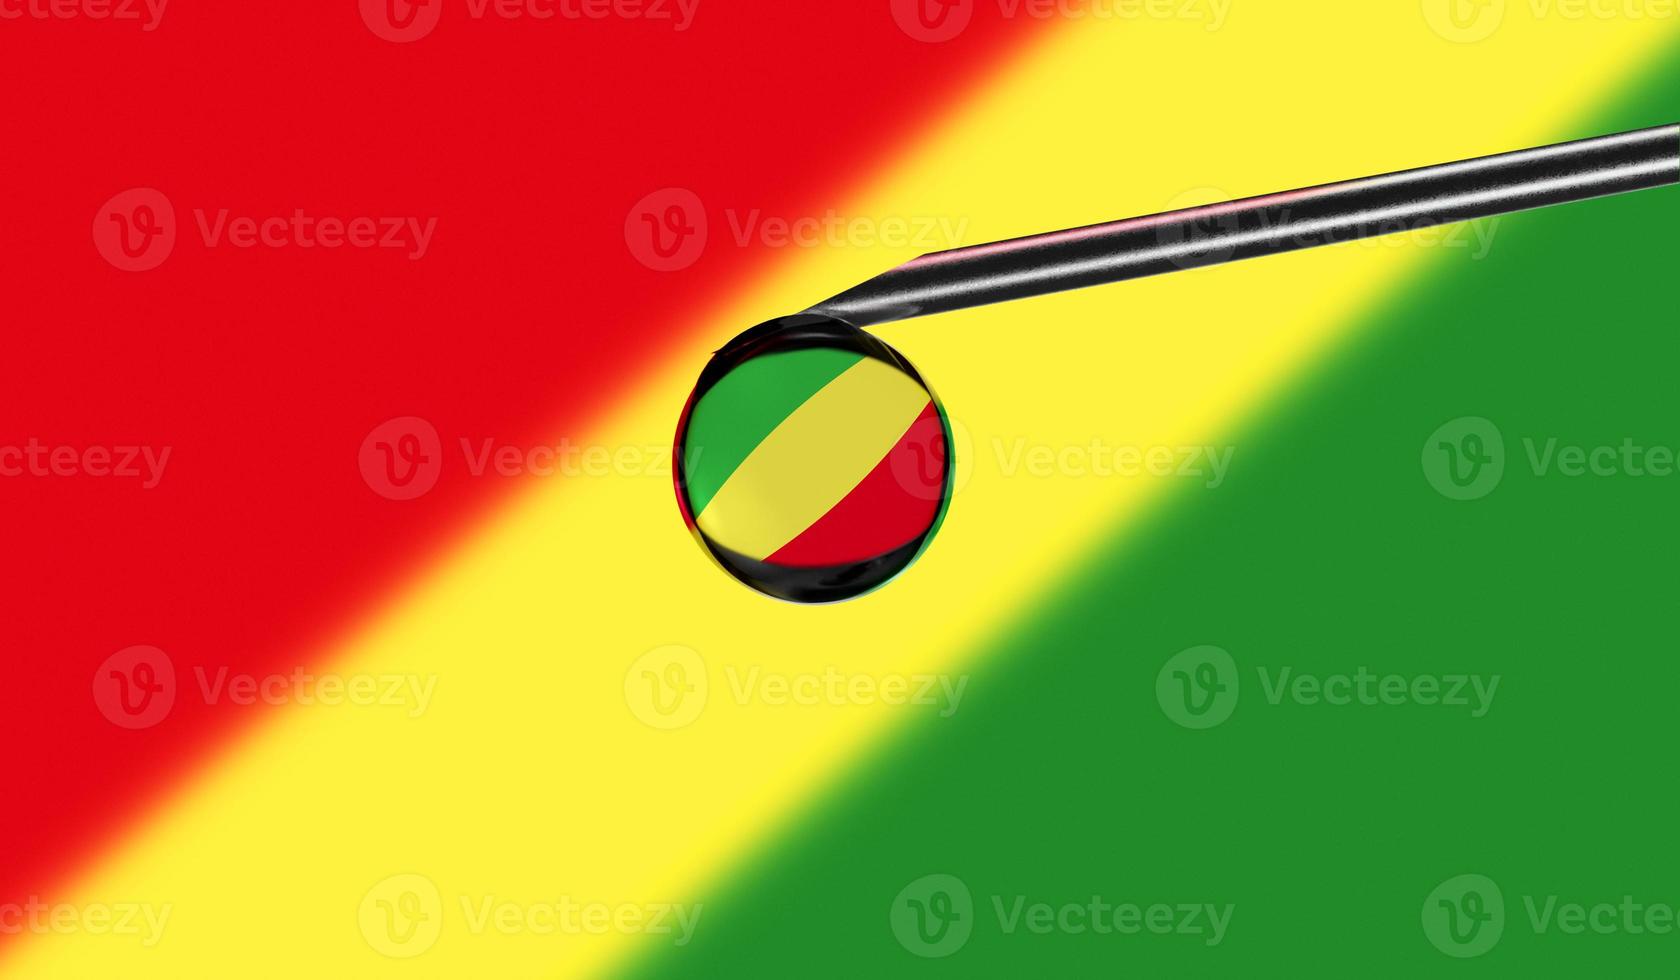 Vaccine syringe with drop on needle against national flag of Congo Republic of the background. Medical concept vaccination. Coronavirus Sars-Cov-2 pandemic protection. National safety idea. photo